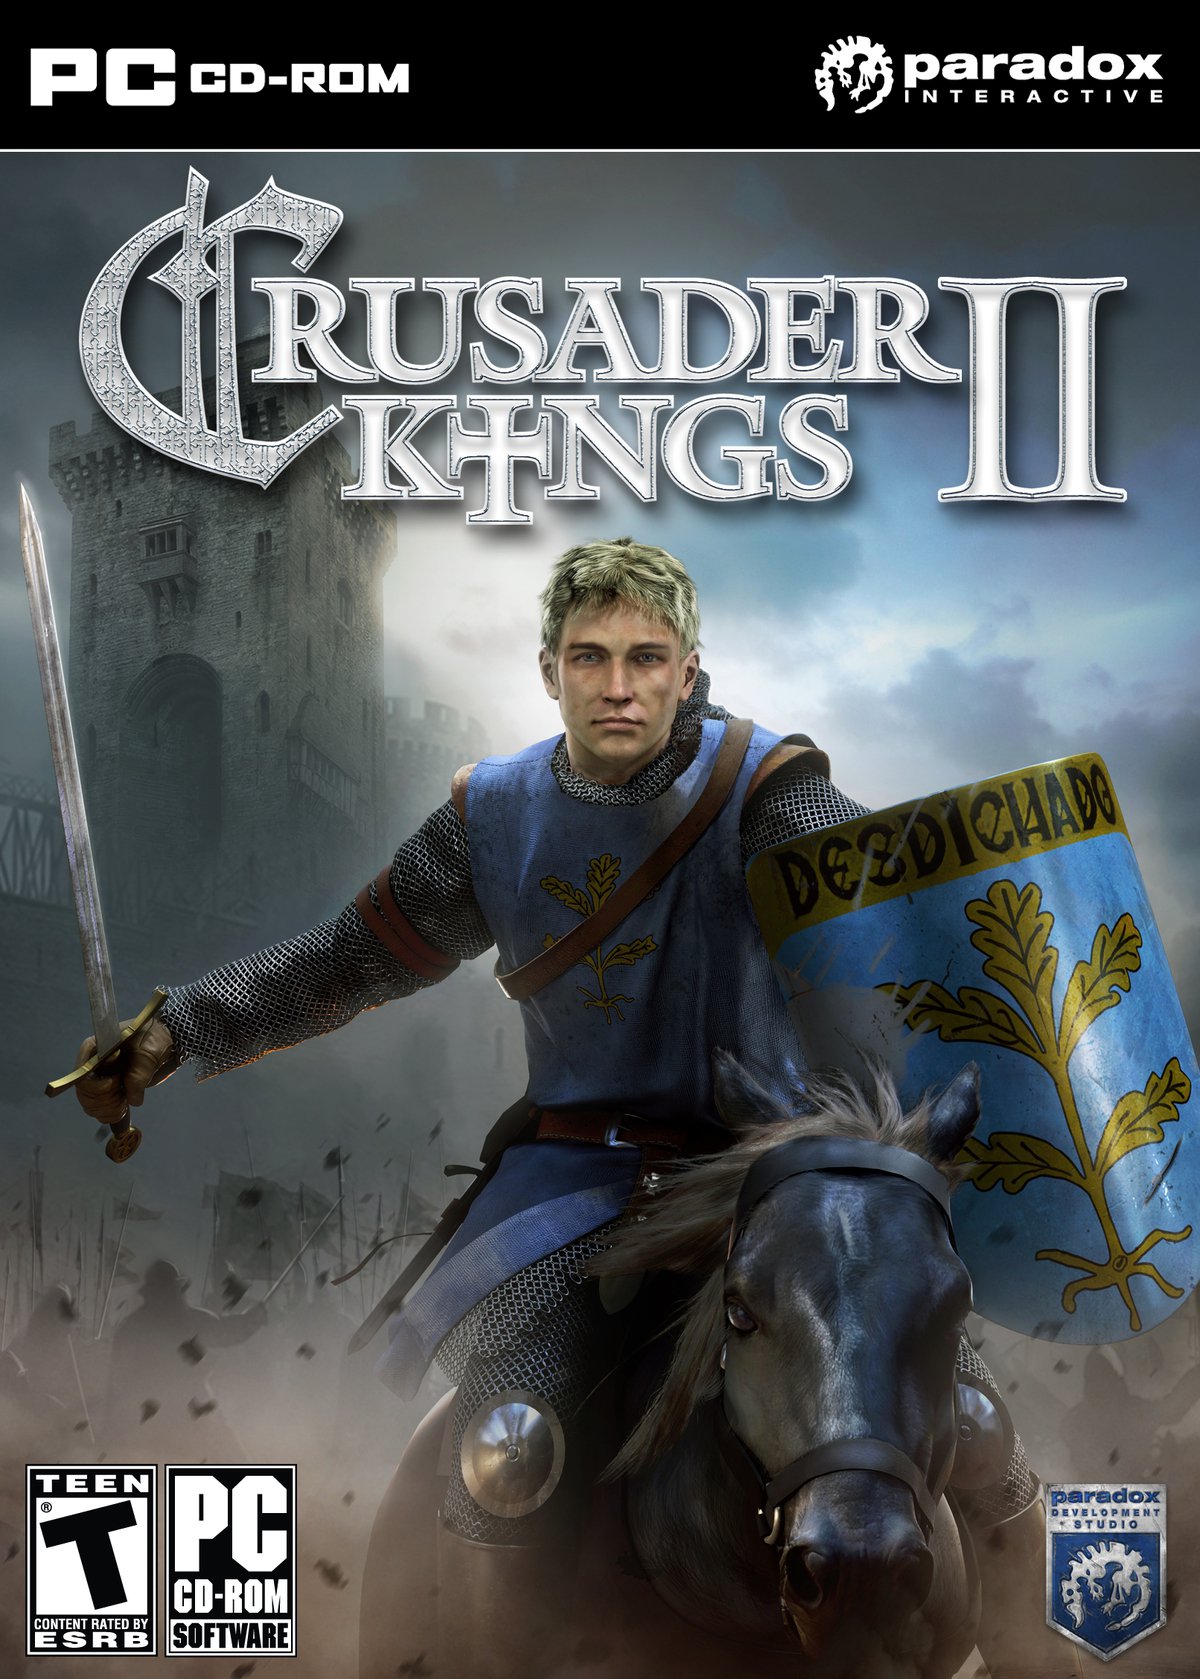 Crusader-Kings-II-Released-on-Steam-for-Linux-with-New-Features-2.jpg